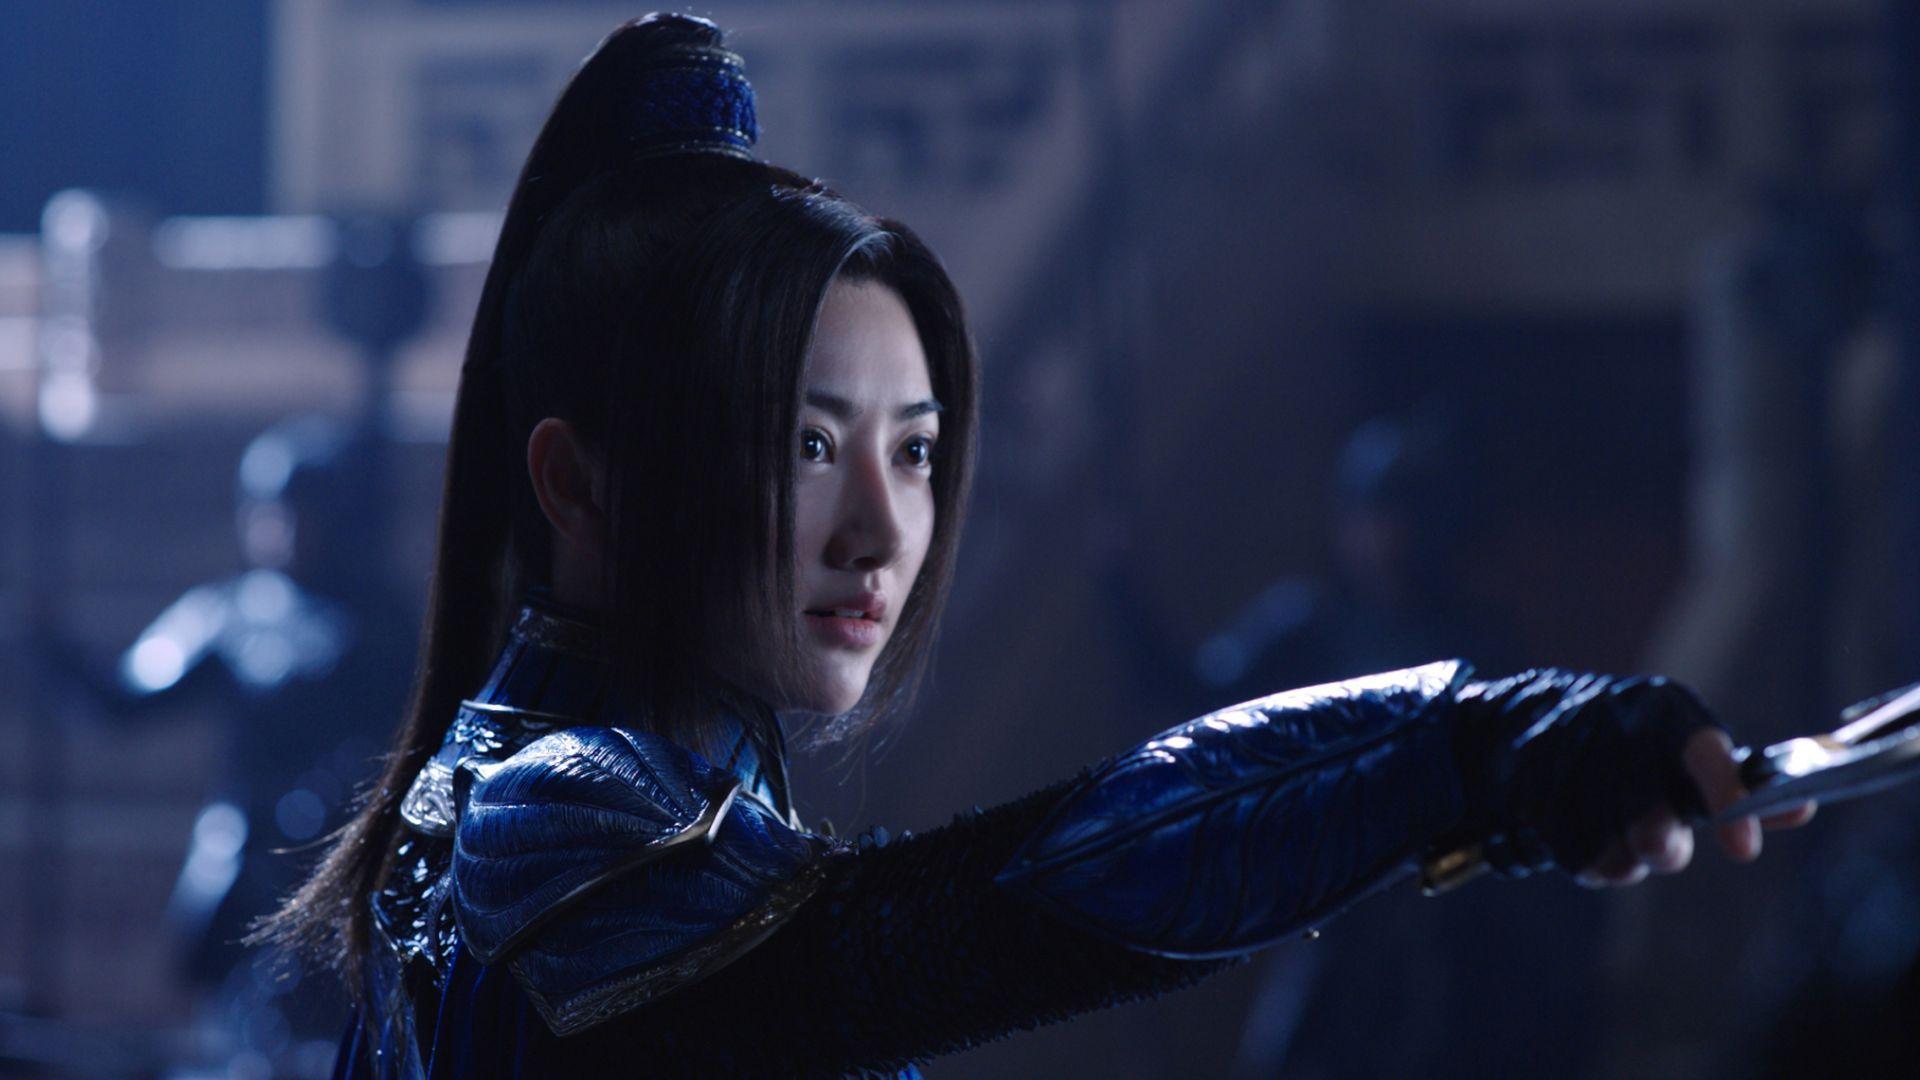 Wallpaper The Great Wall, Jing Tian, best movies, Movies